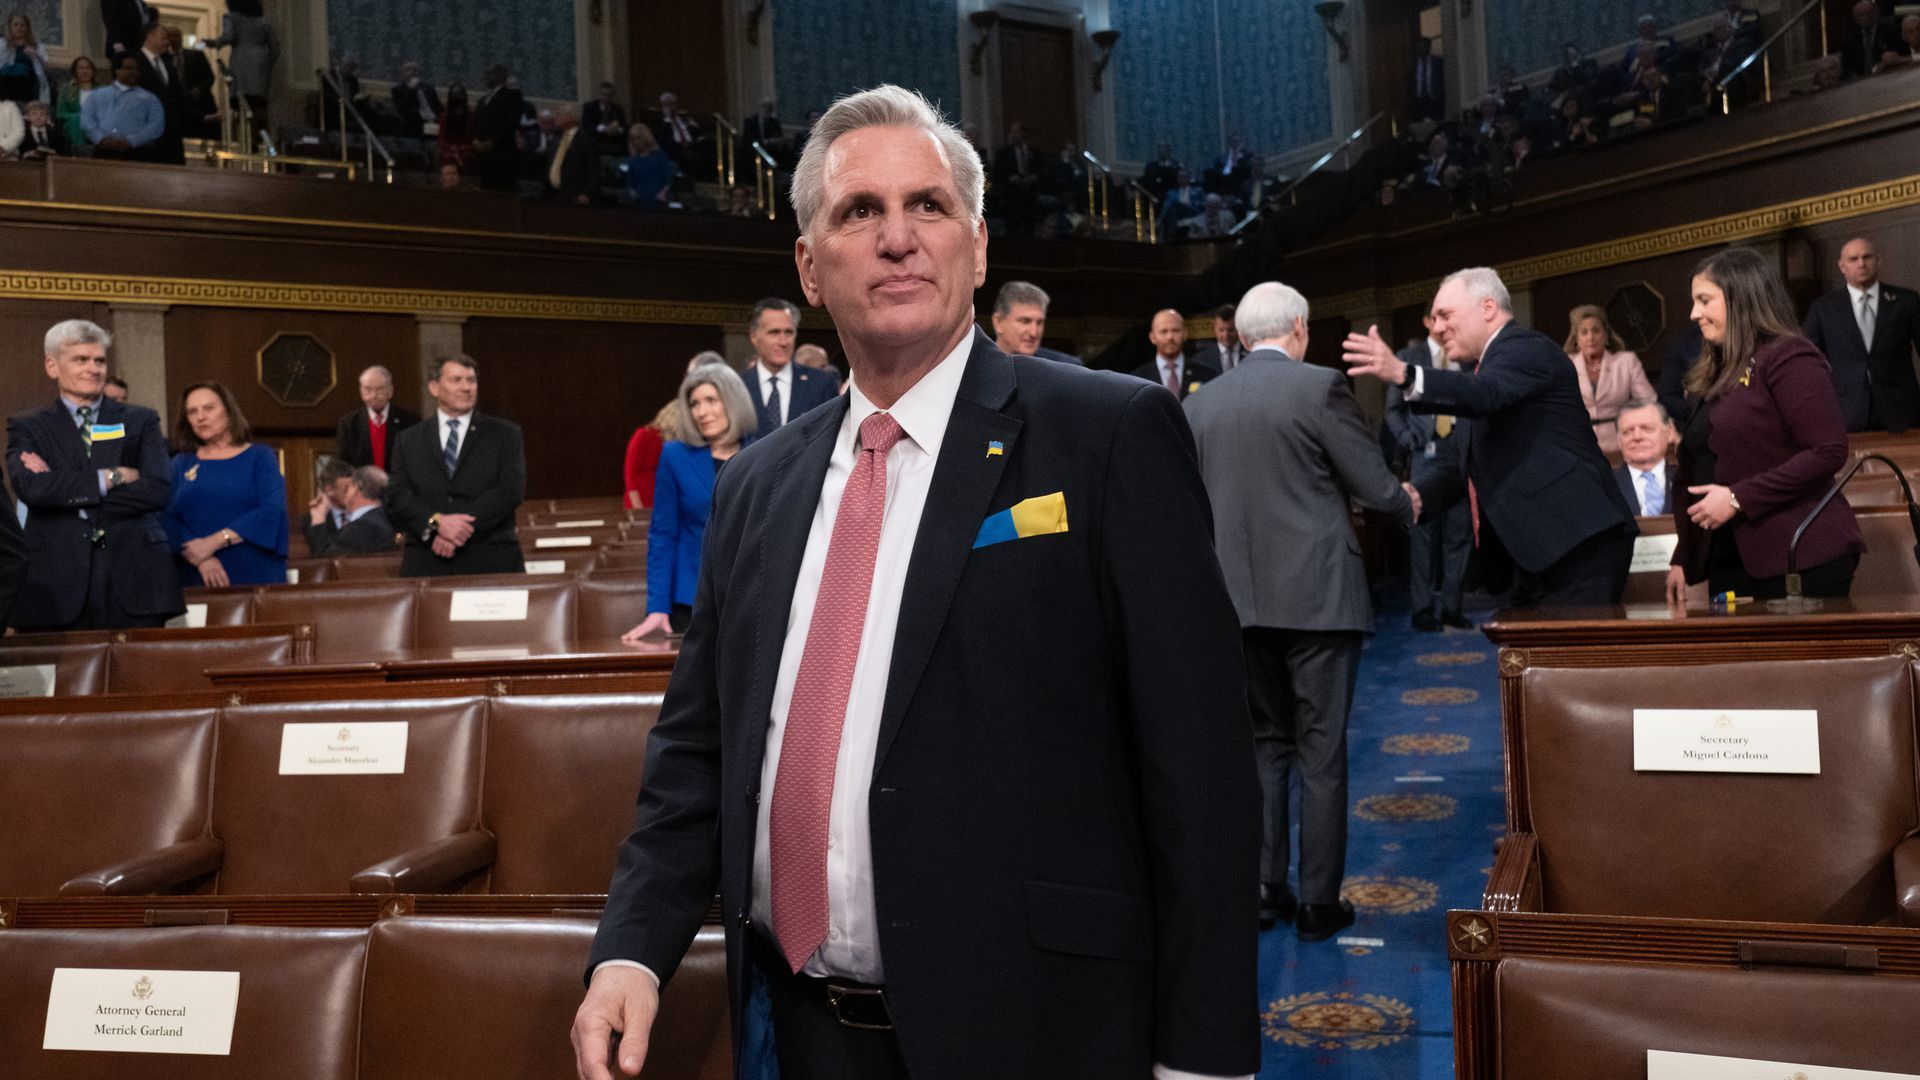 House Minority Leader Kevin McCarthy (R-Calif.) at the State of the Union, in the House Chamber on March 1.